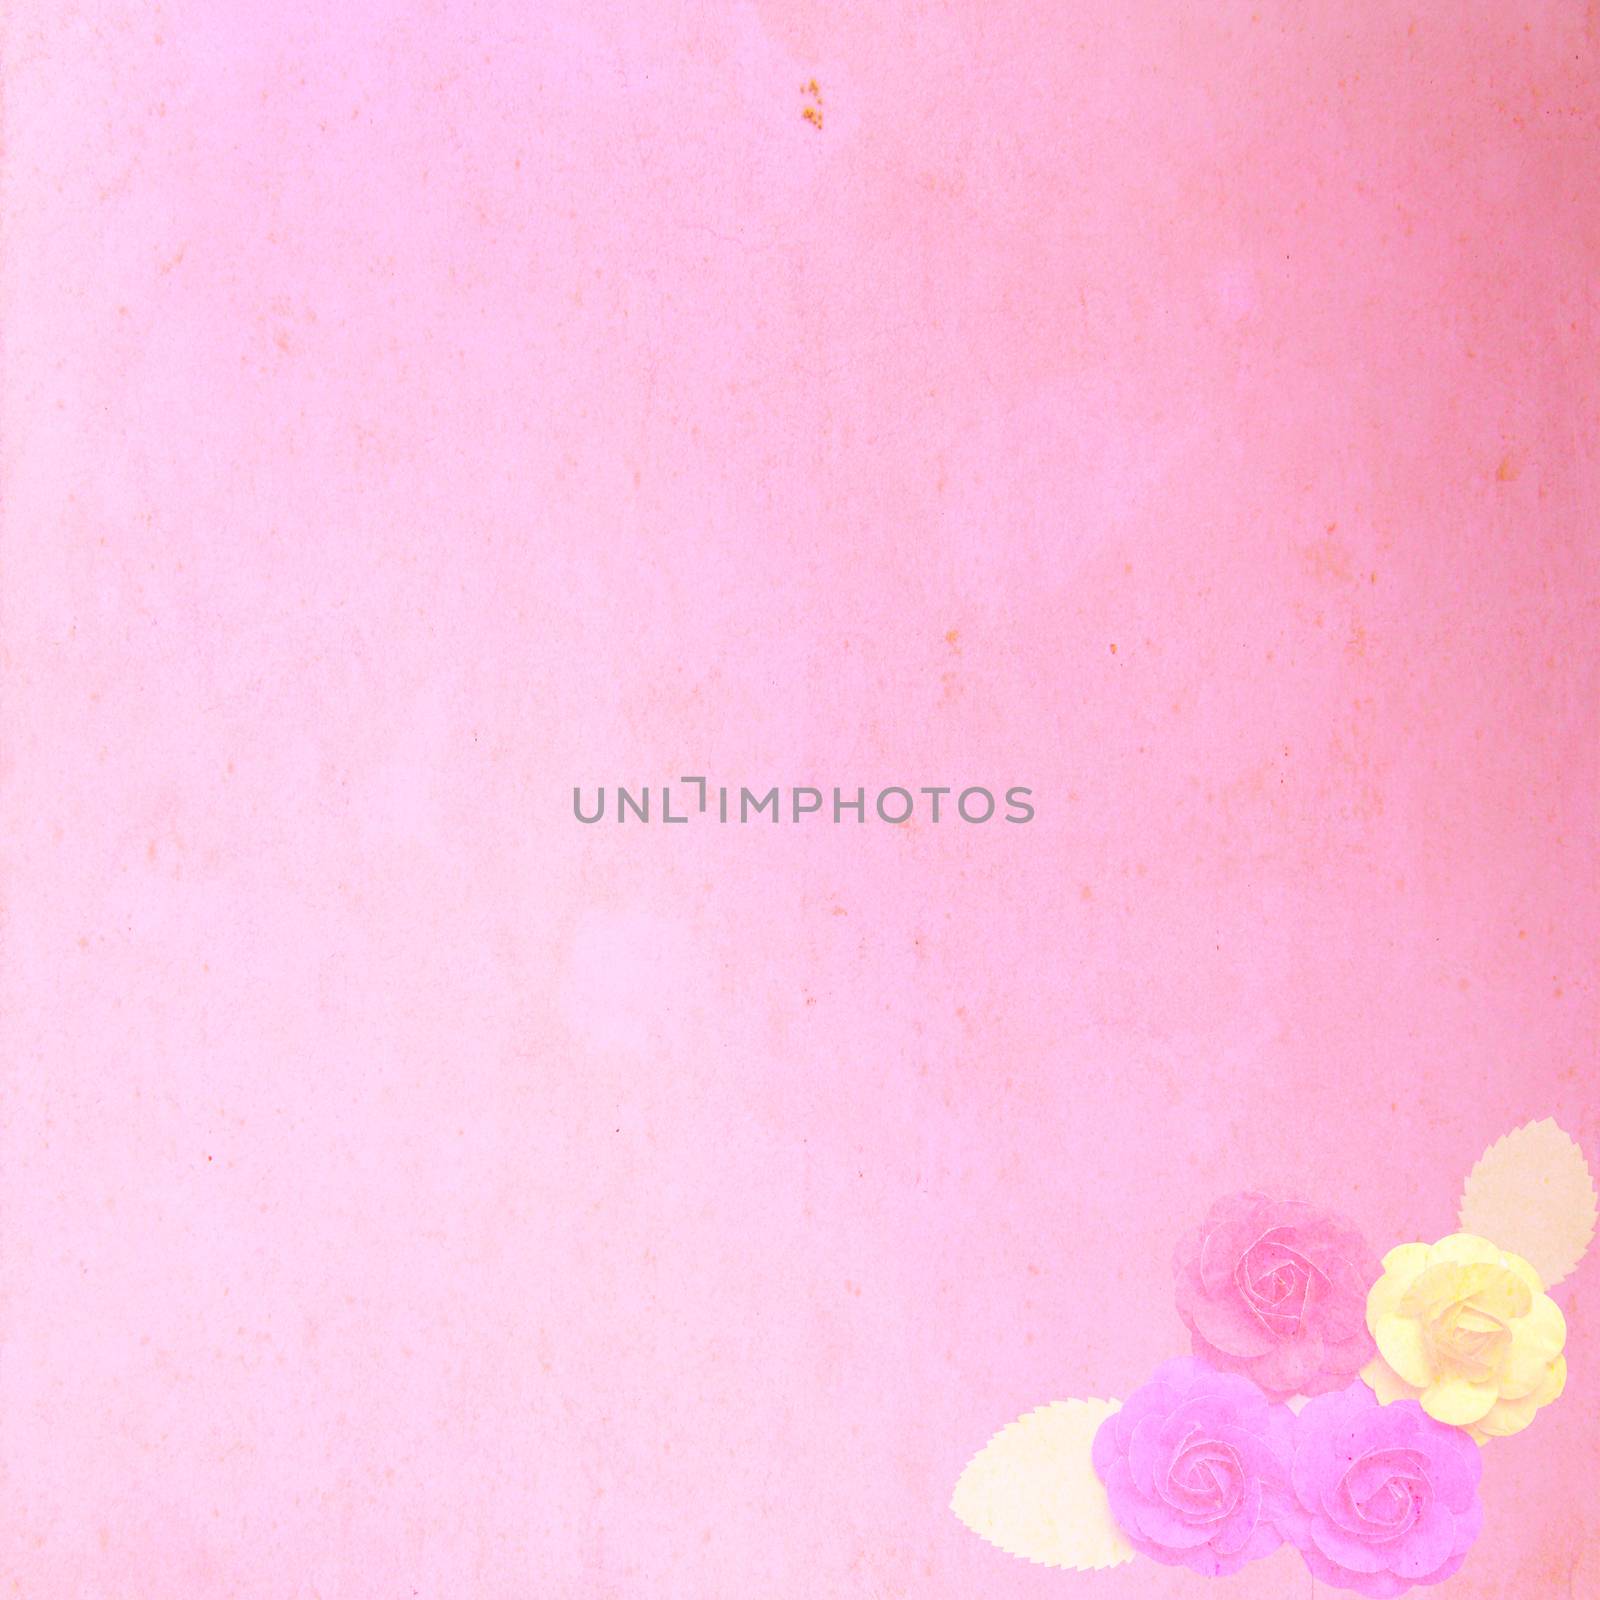 Pink Old paper with flower for background